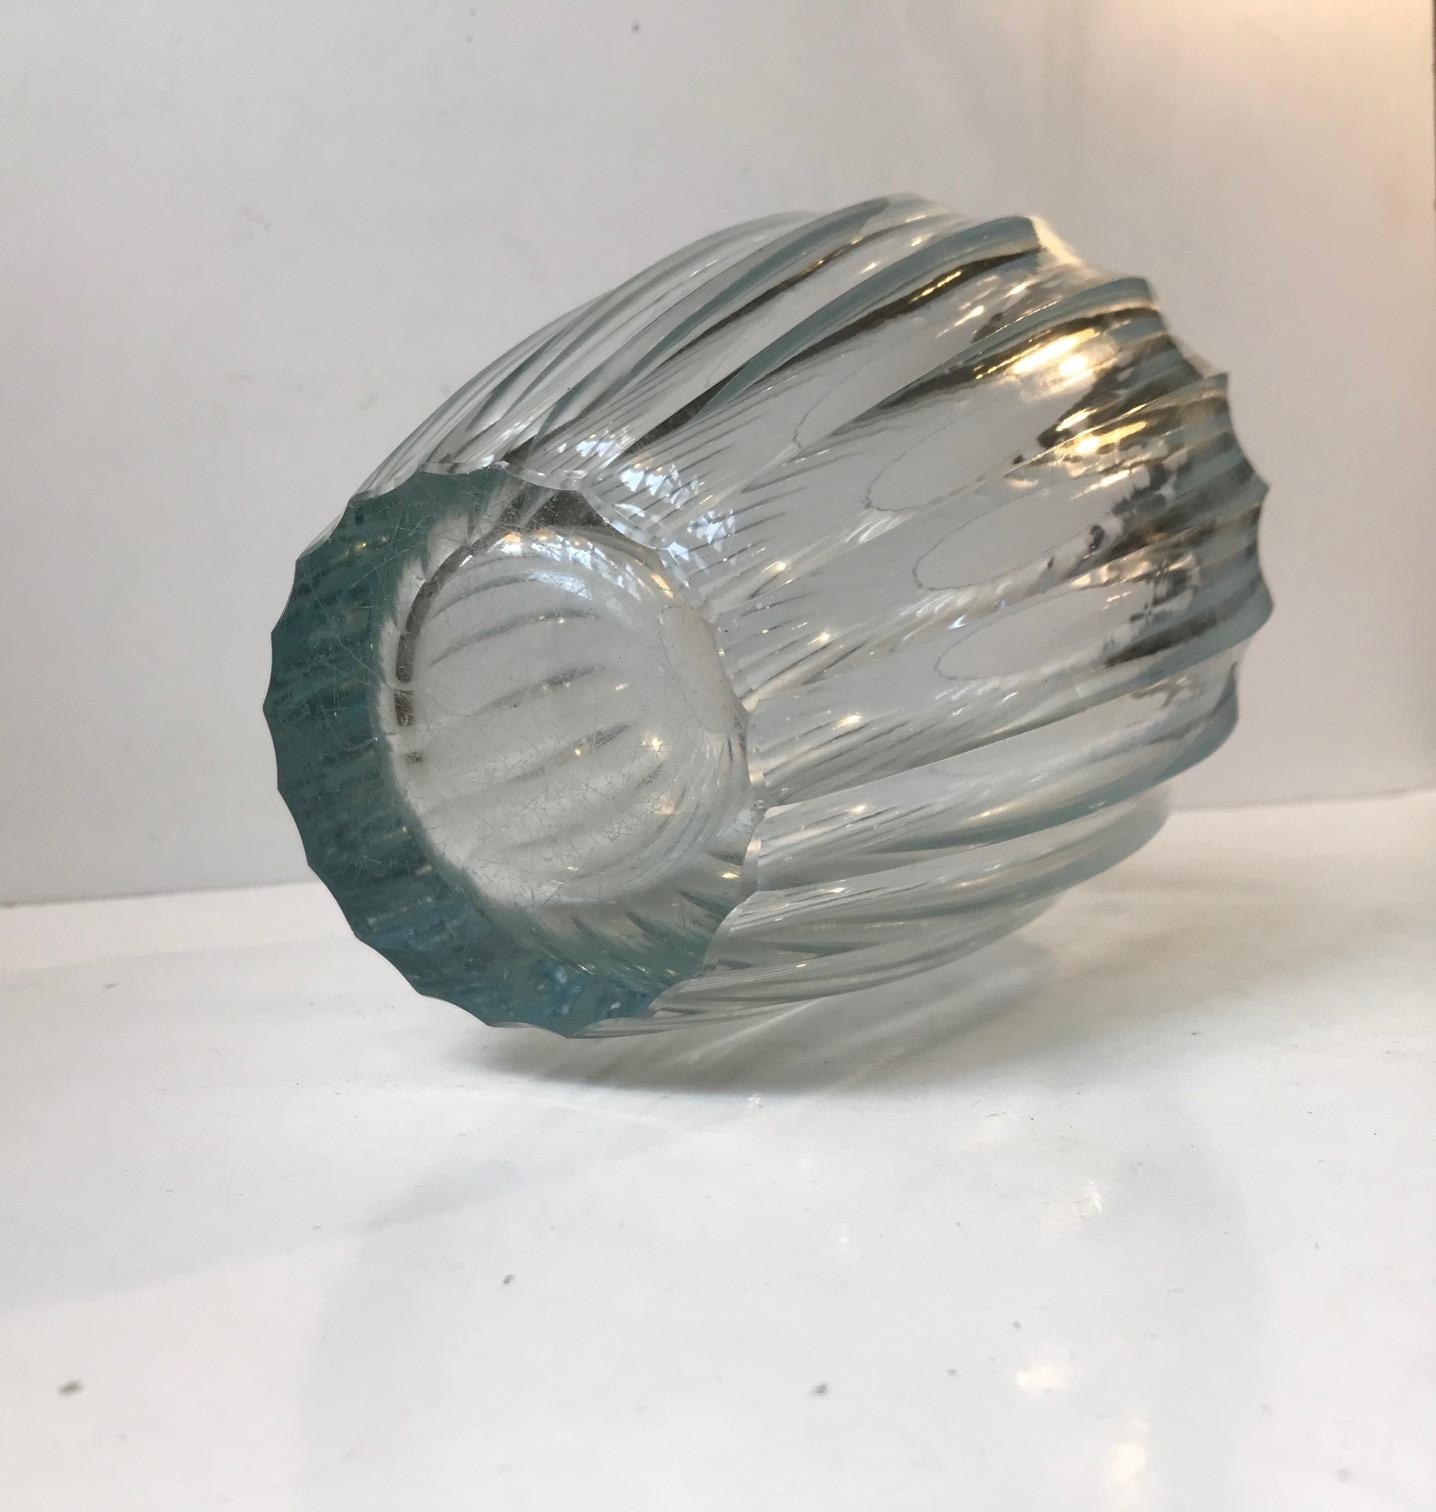 Simon Gate Triton Crystal Vase for Orrefors, 1916-1920 In Good Condition For Sale In Esbjerg, DK